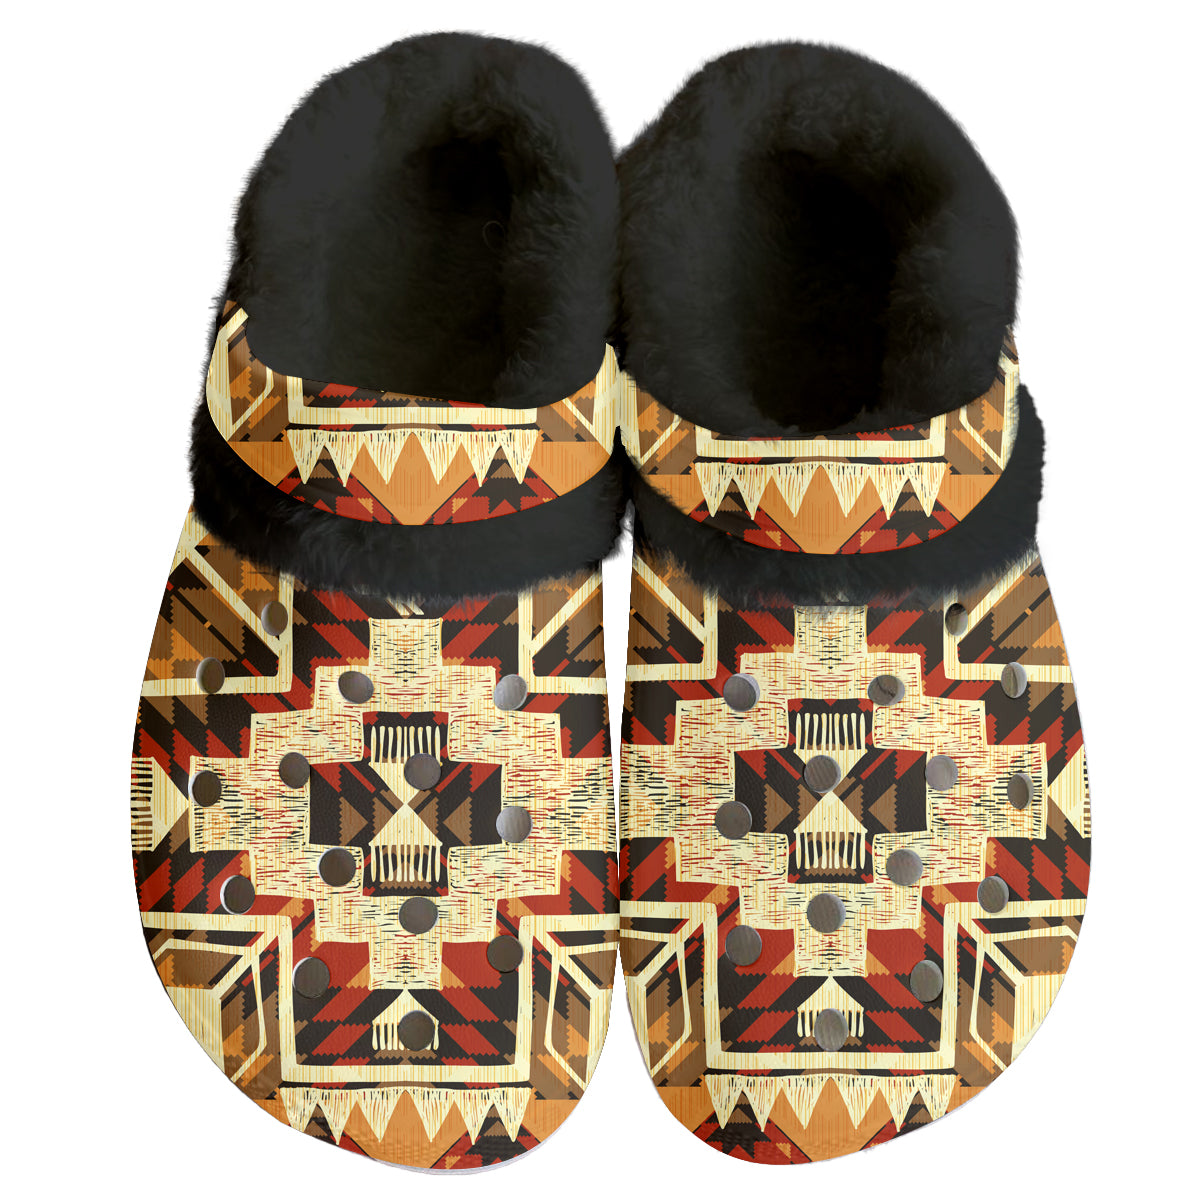 GB-NAT00022 Pattern Native American Classic Clogs with Fleece Shoes